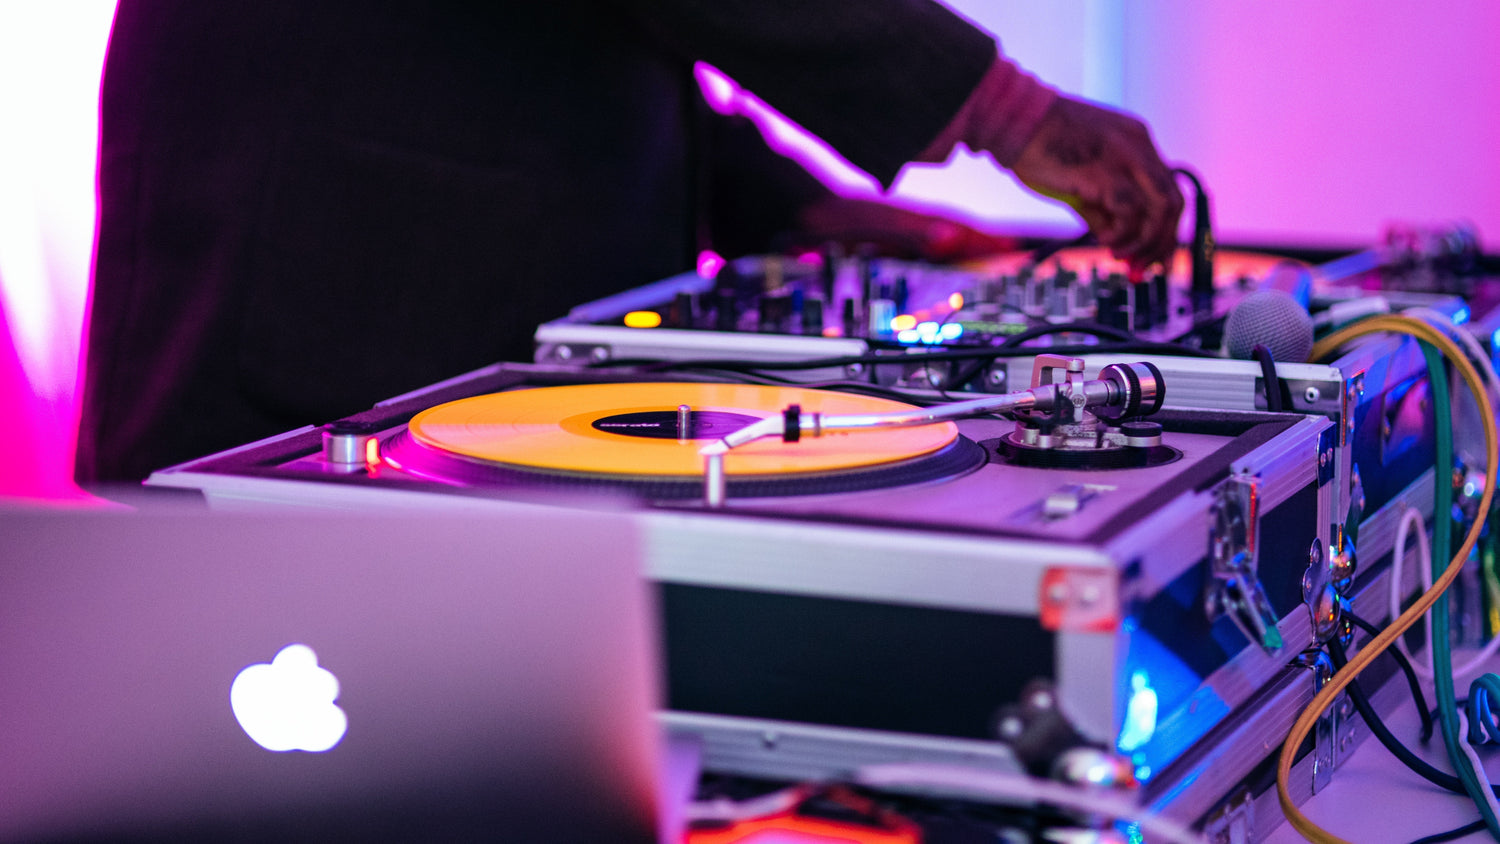 Beginners Guide to a Basic DJ Set-Up at Home - MusicMajlis